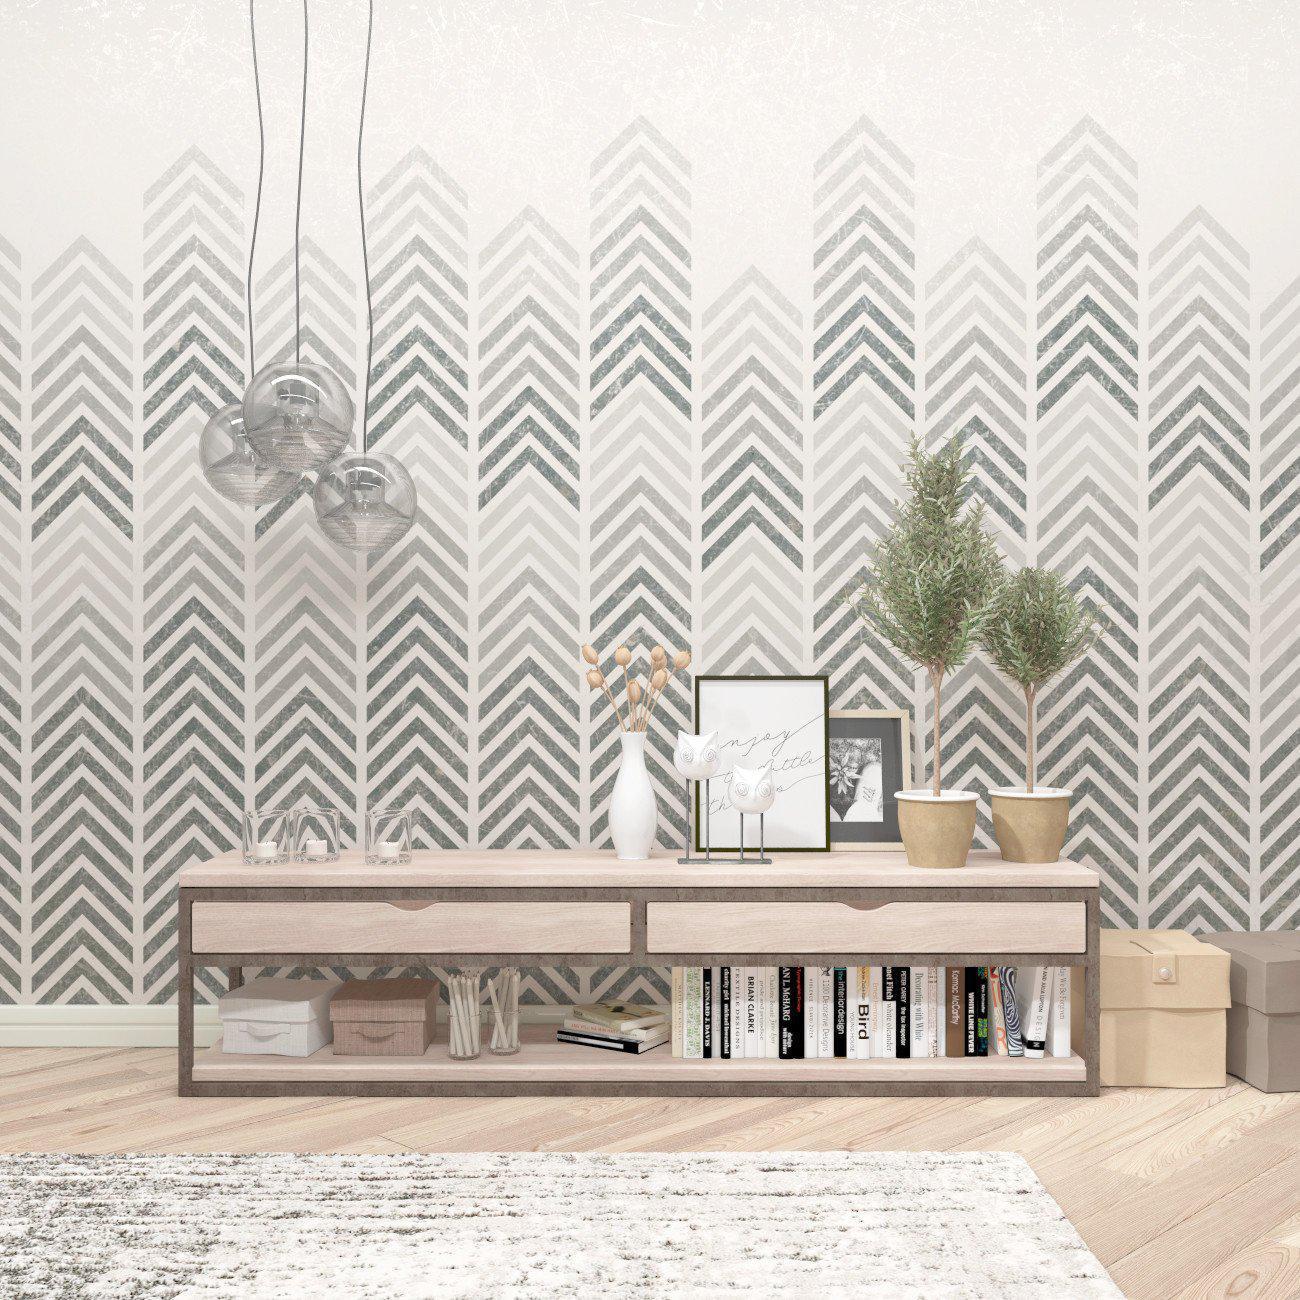 Modern Fibers Wall Stencils - Woven Texture Designs for Painting Walls